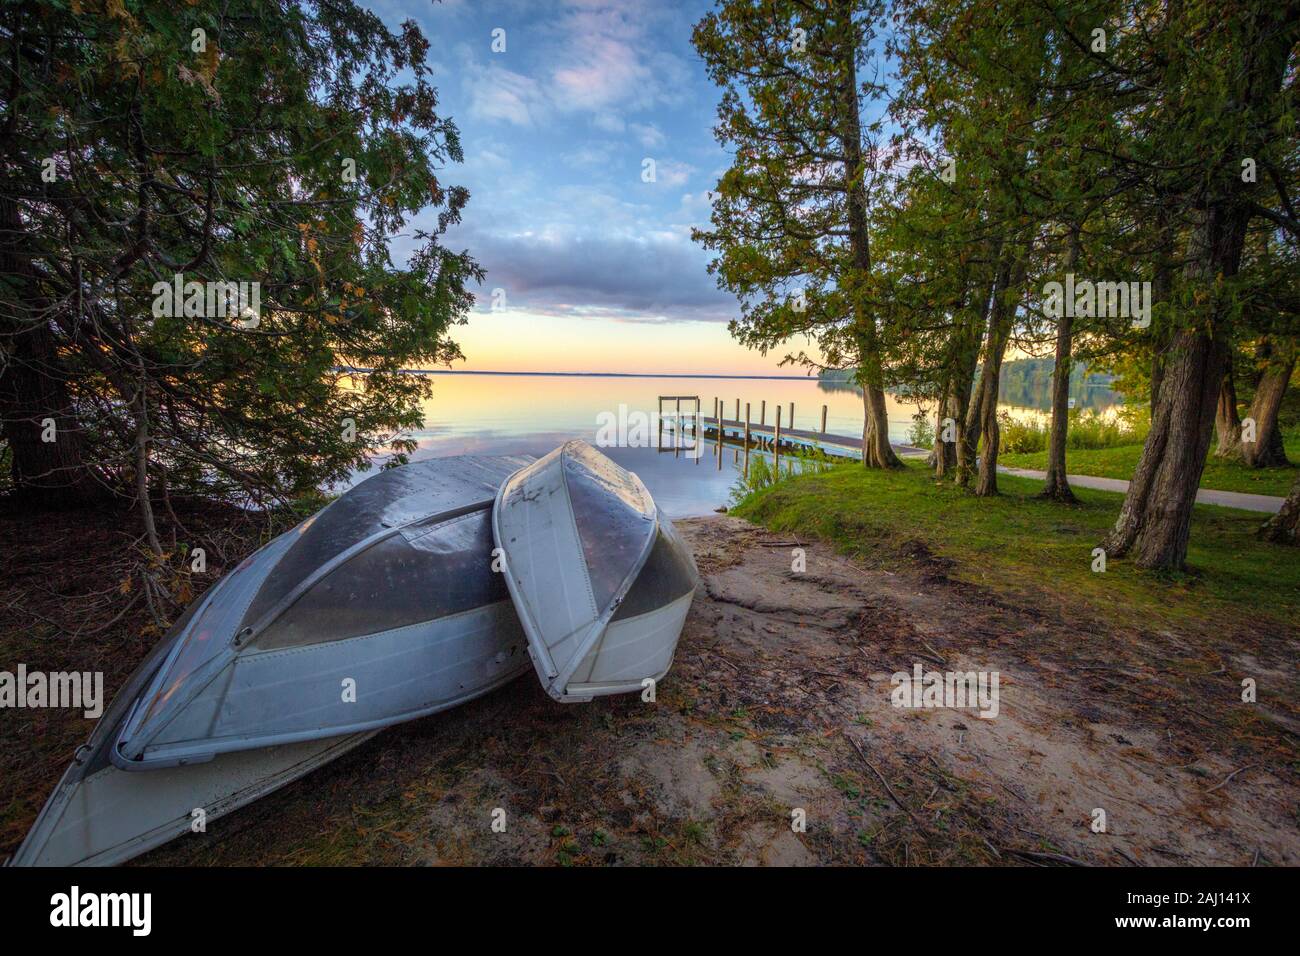 Rowboats On Sunset Lake. Group of aluminum rowboats on the beach of a sunset lake with a wooden dock in the background. Indian Lake State Park. Stock Photo